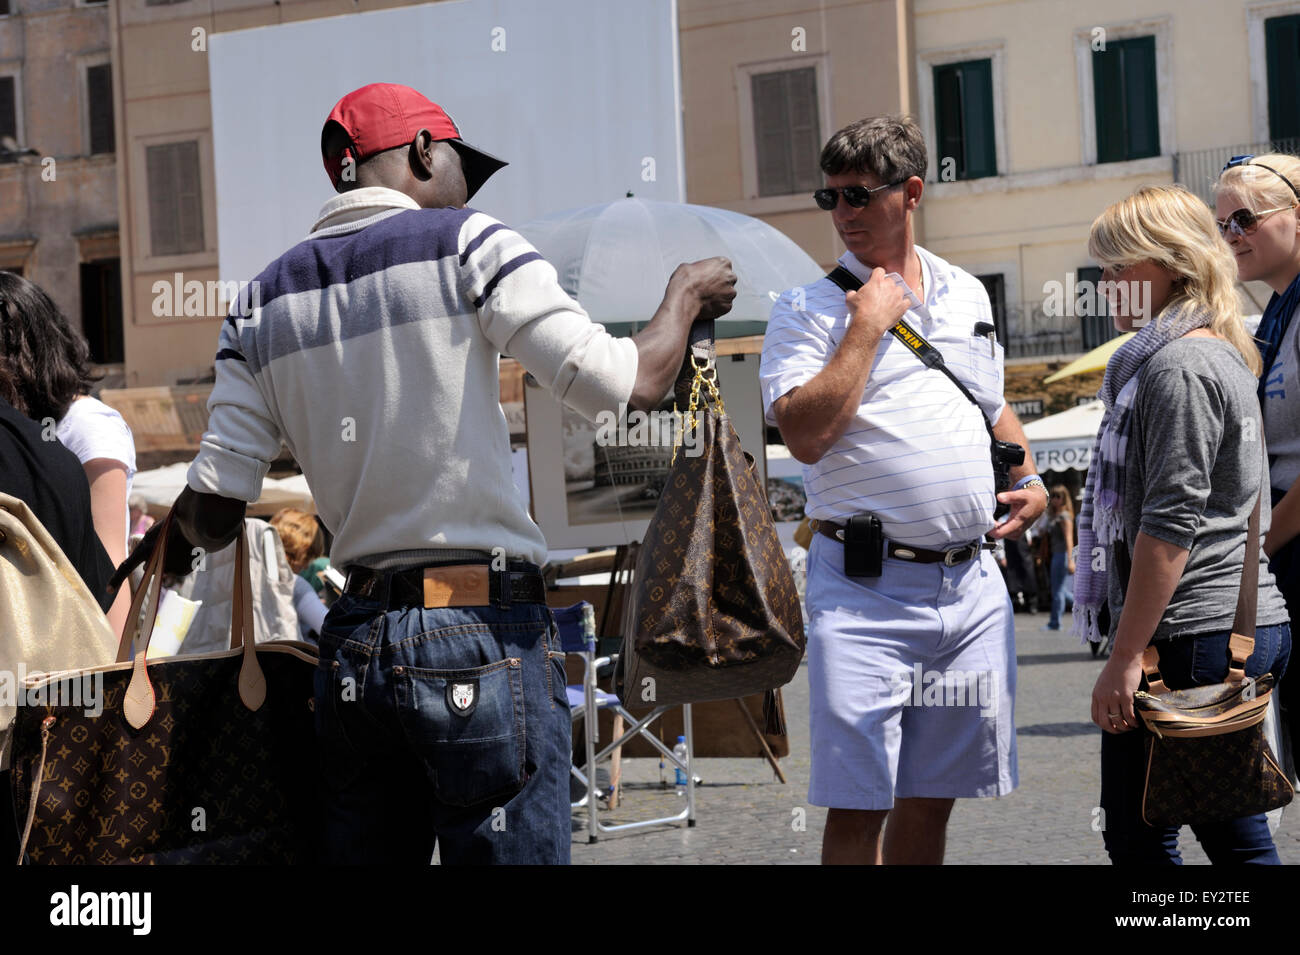 Italy, Rome, Piazza Navona, immigrants selling counterfeit goods to tourists Stock Photo